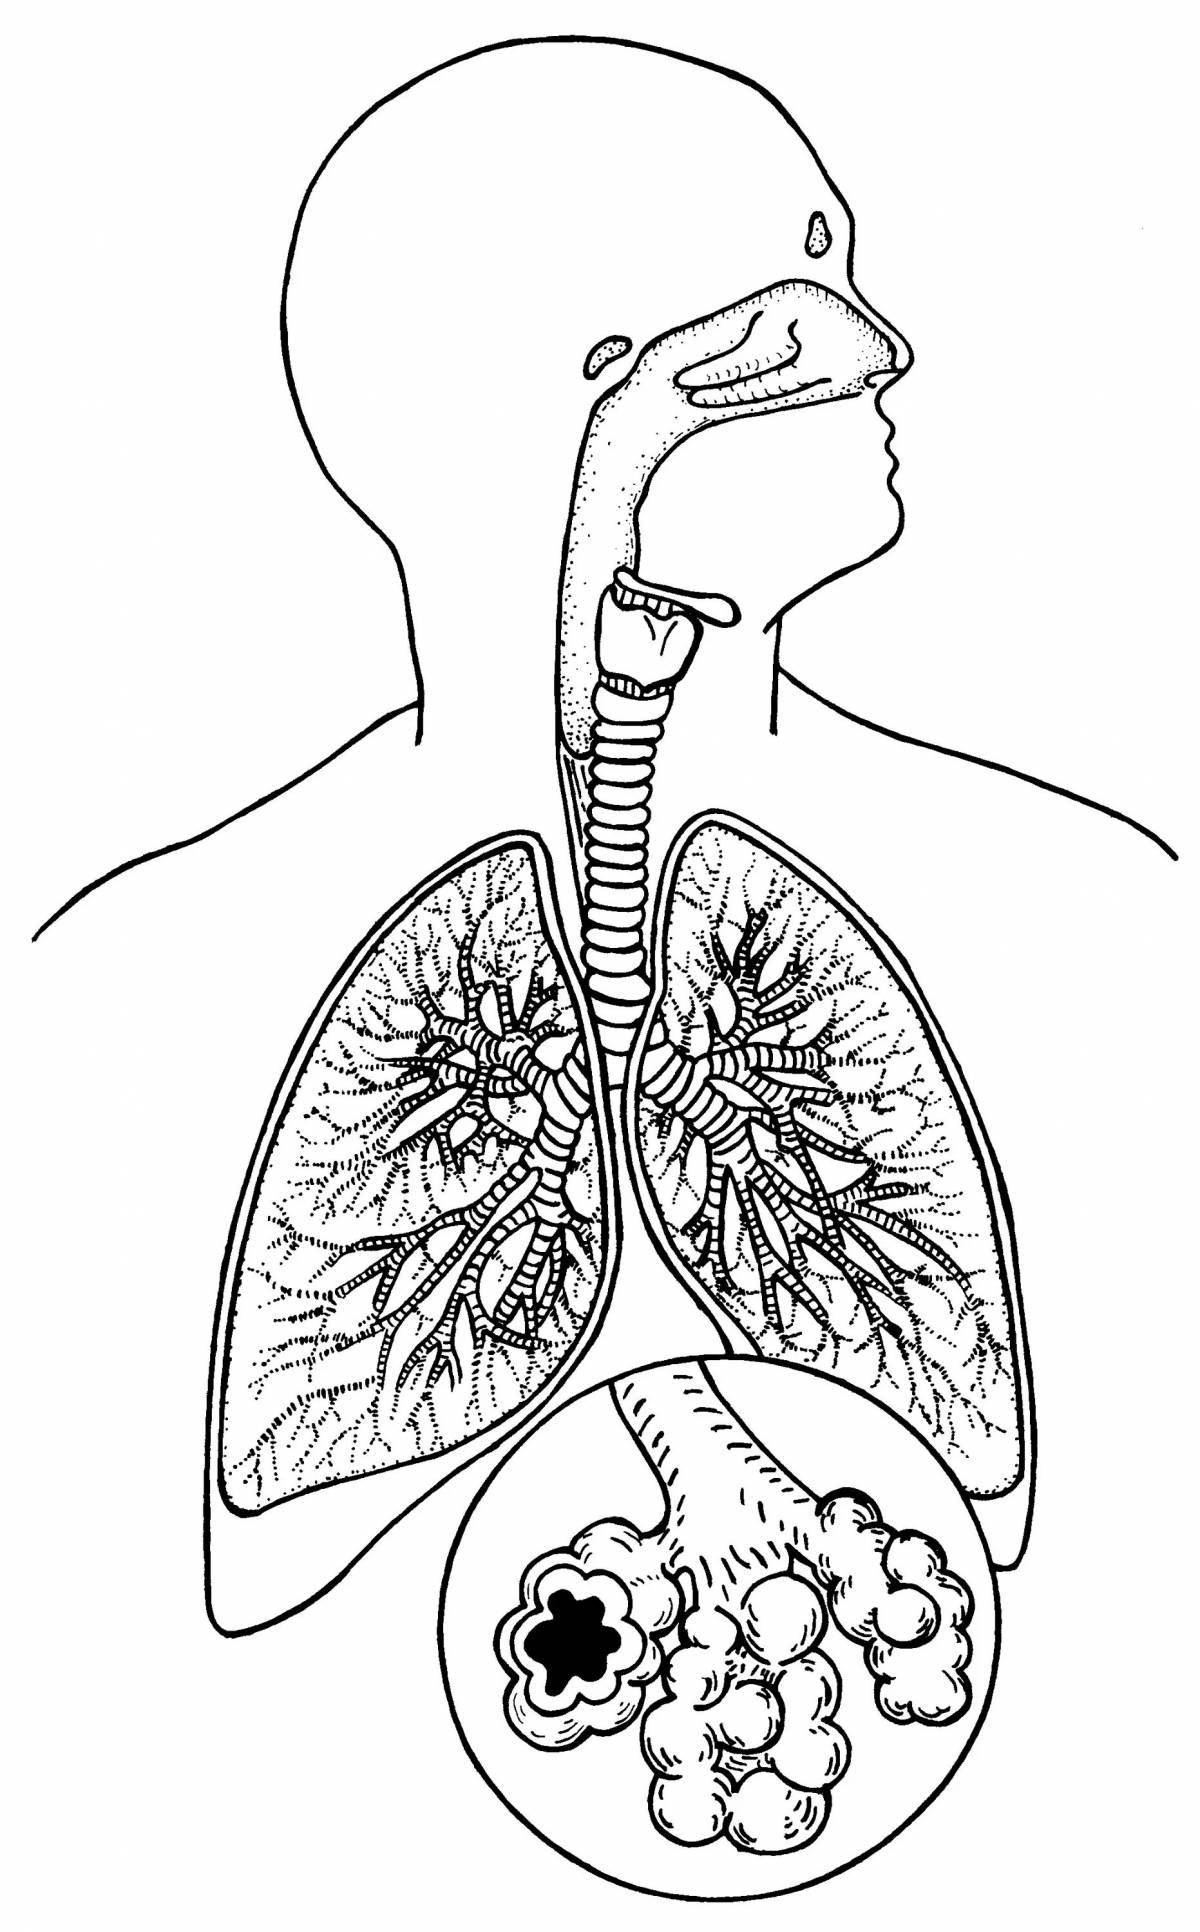 Colorful respiratory system coloring page